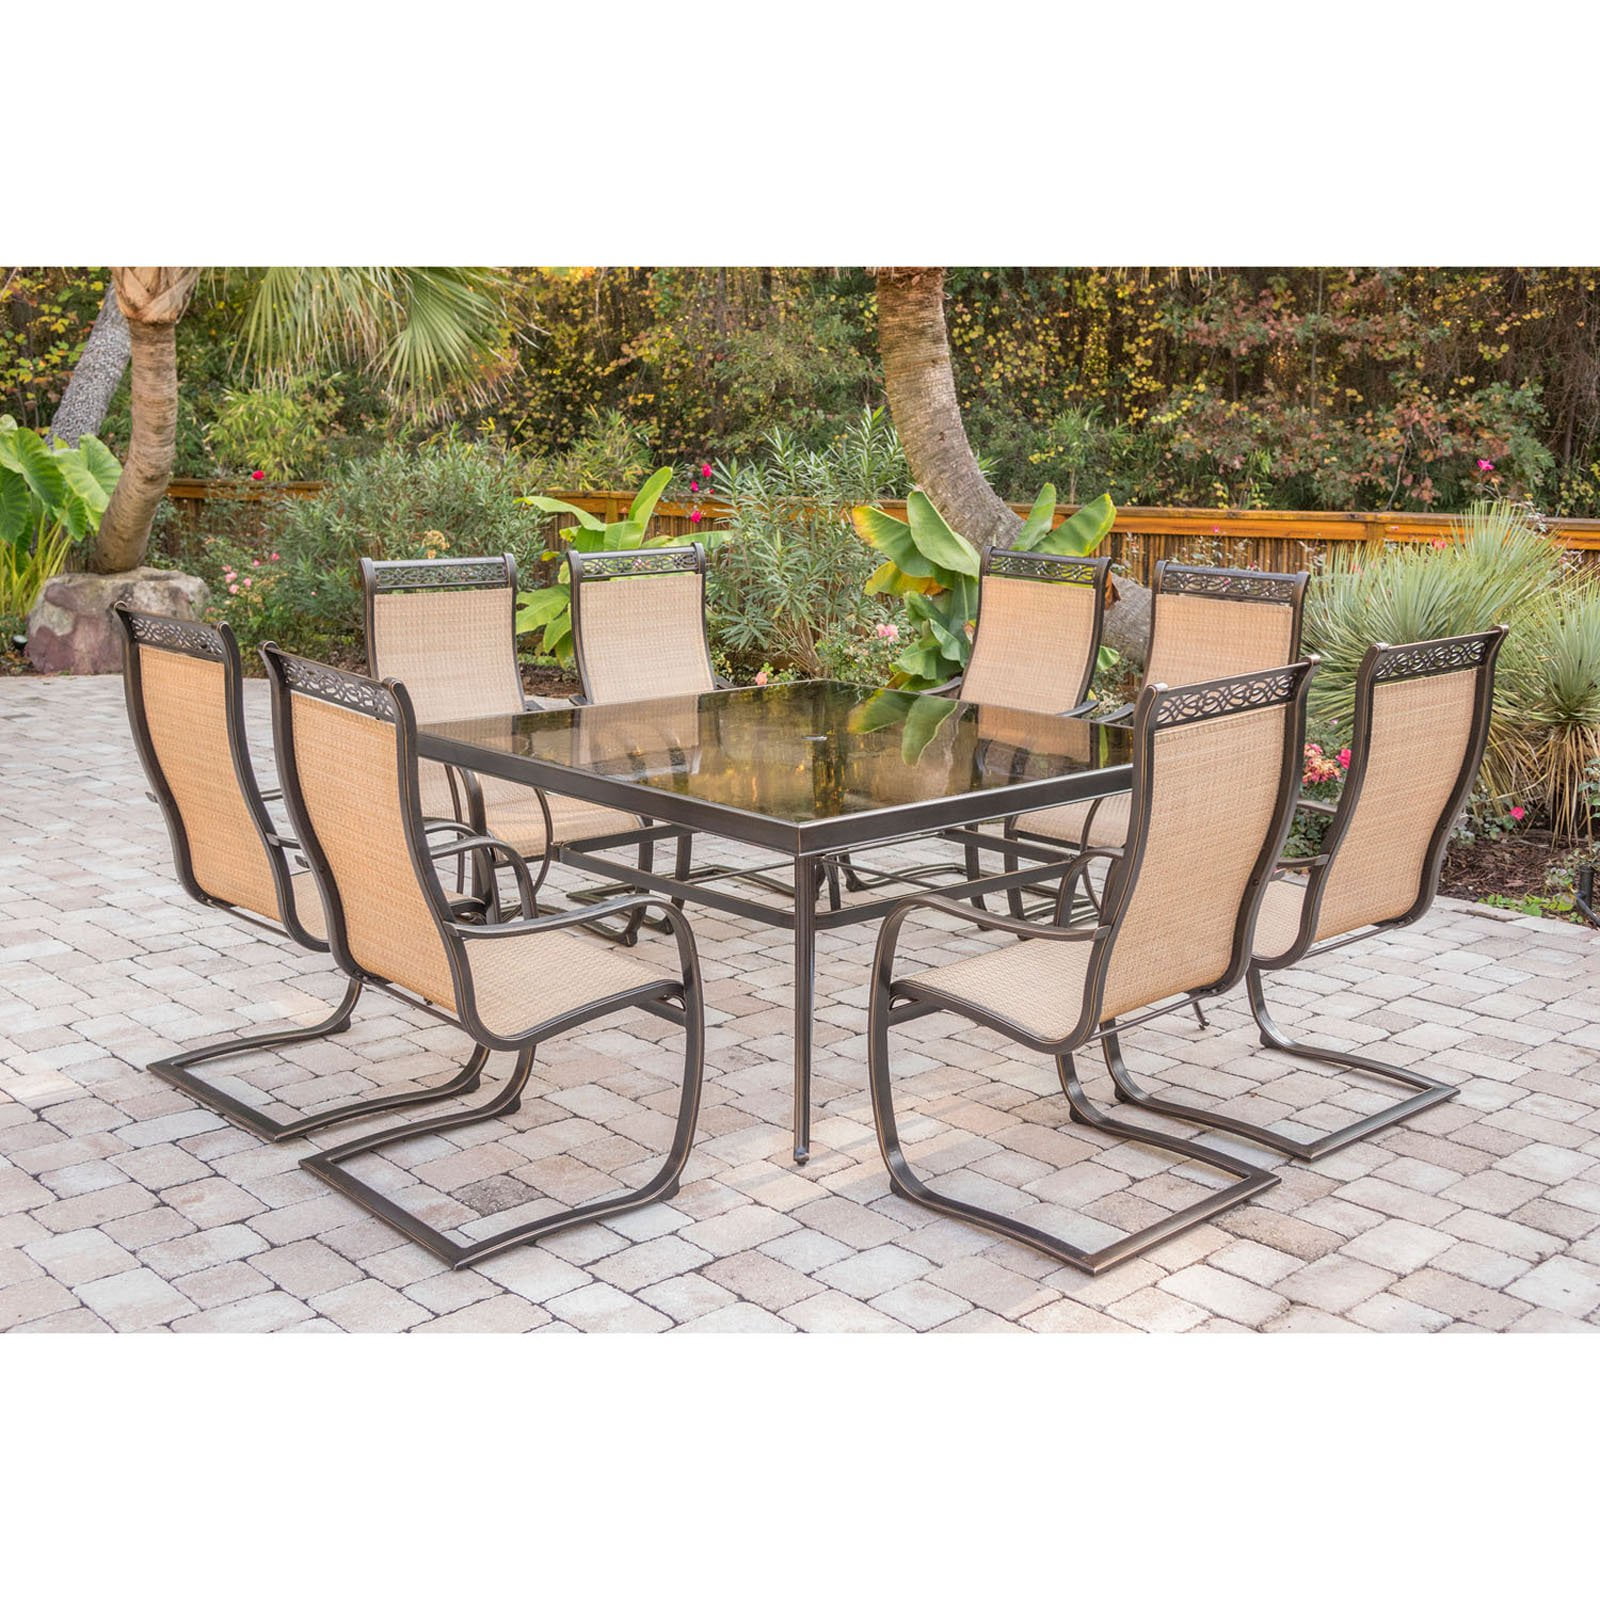 Hanover Outdoor Monaco 9 Piece Sling, 8 Seat Outdoor Dining Table Square